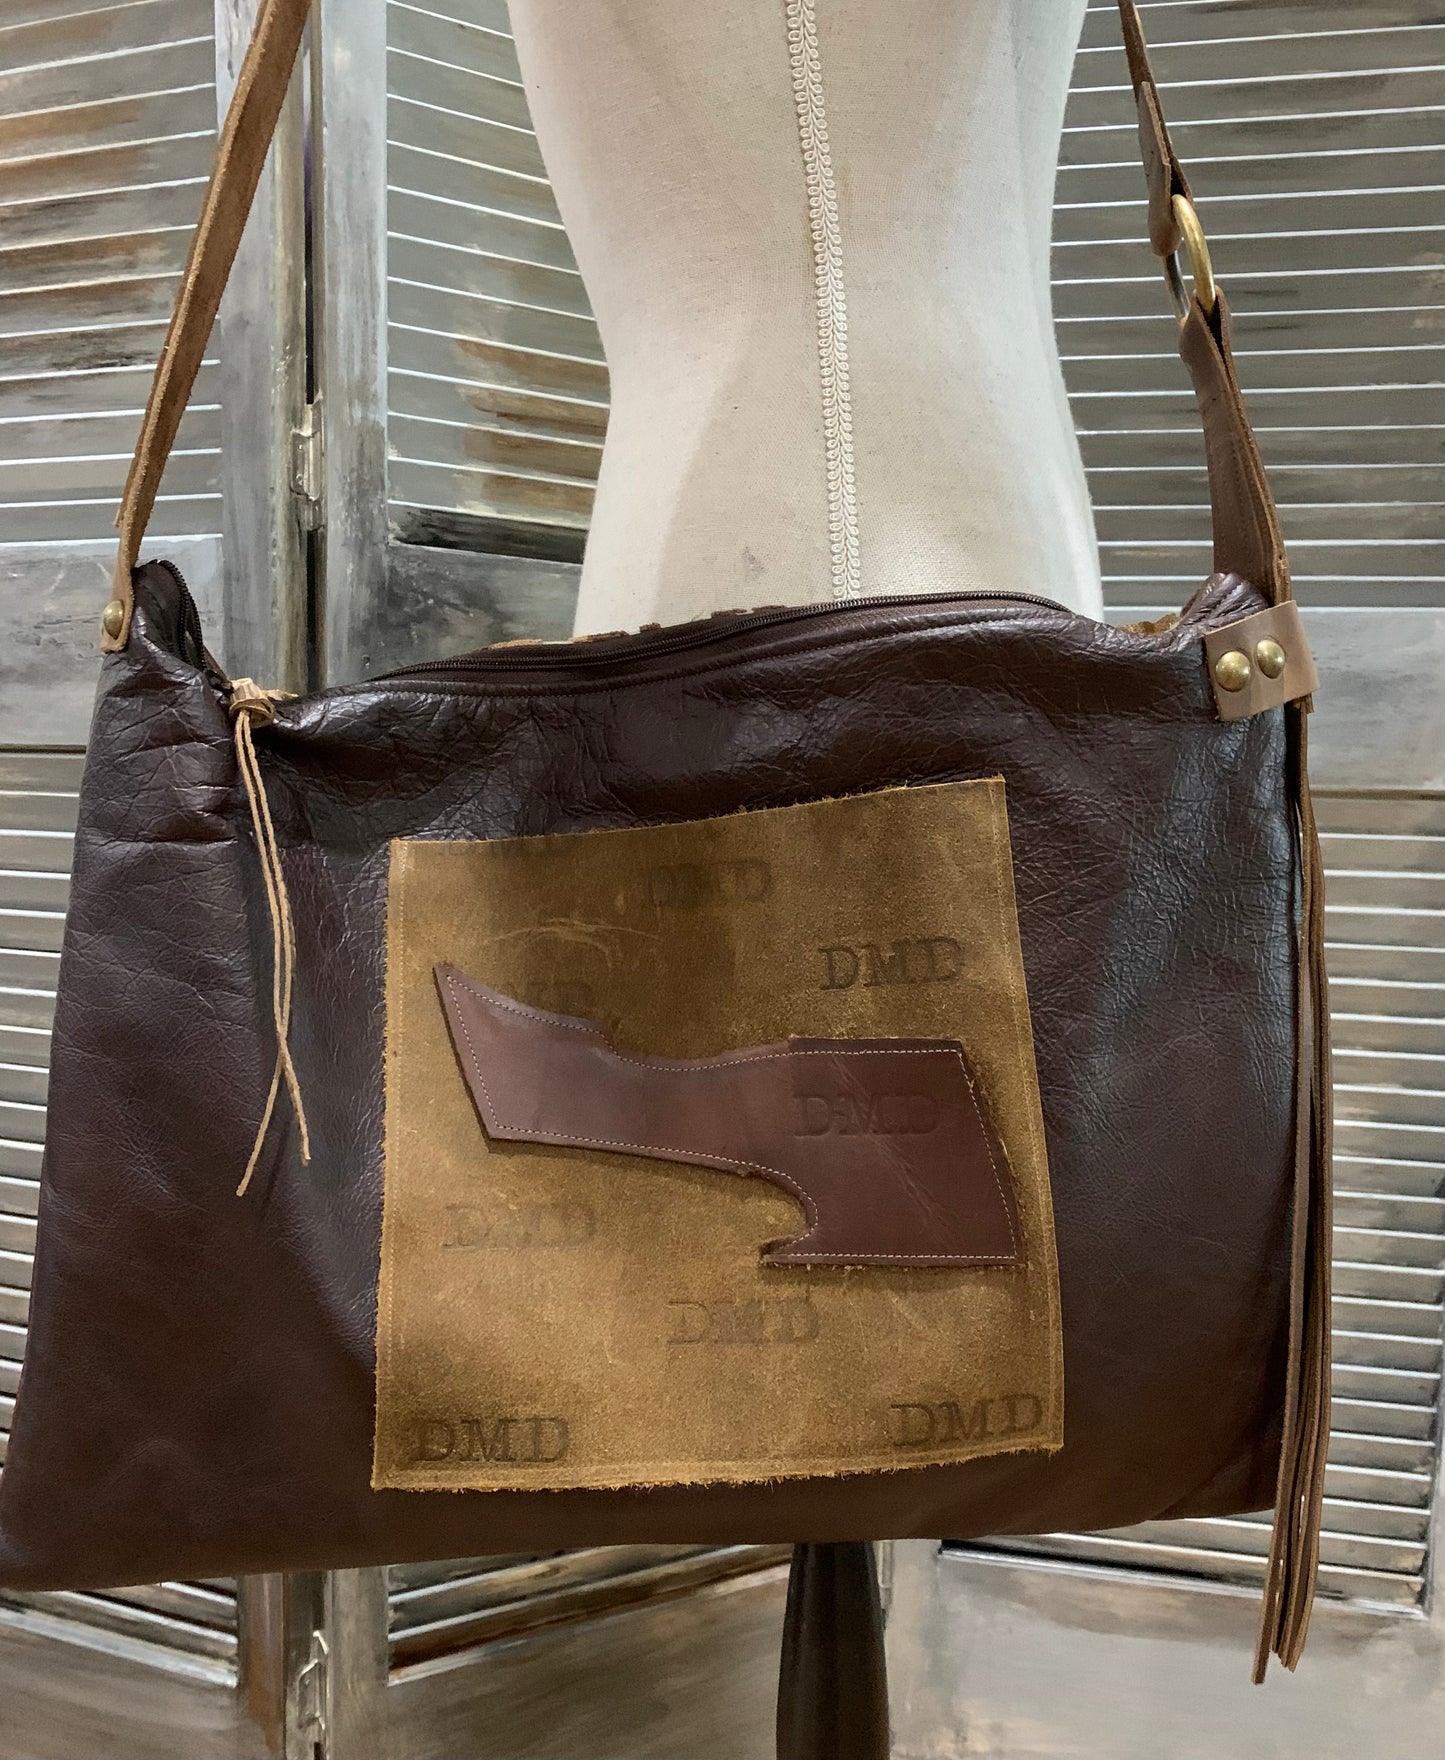 19x13 Brown Bag Special! - DMD Bags